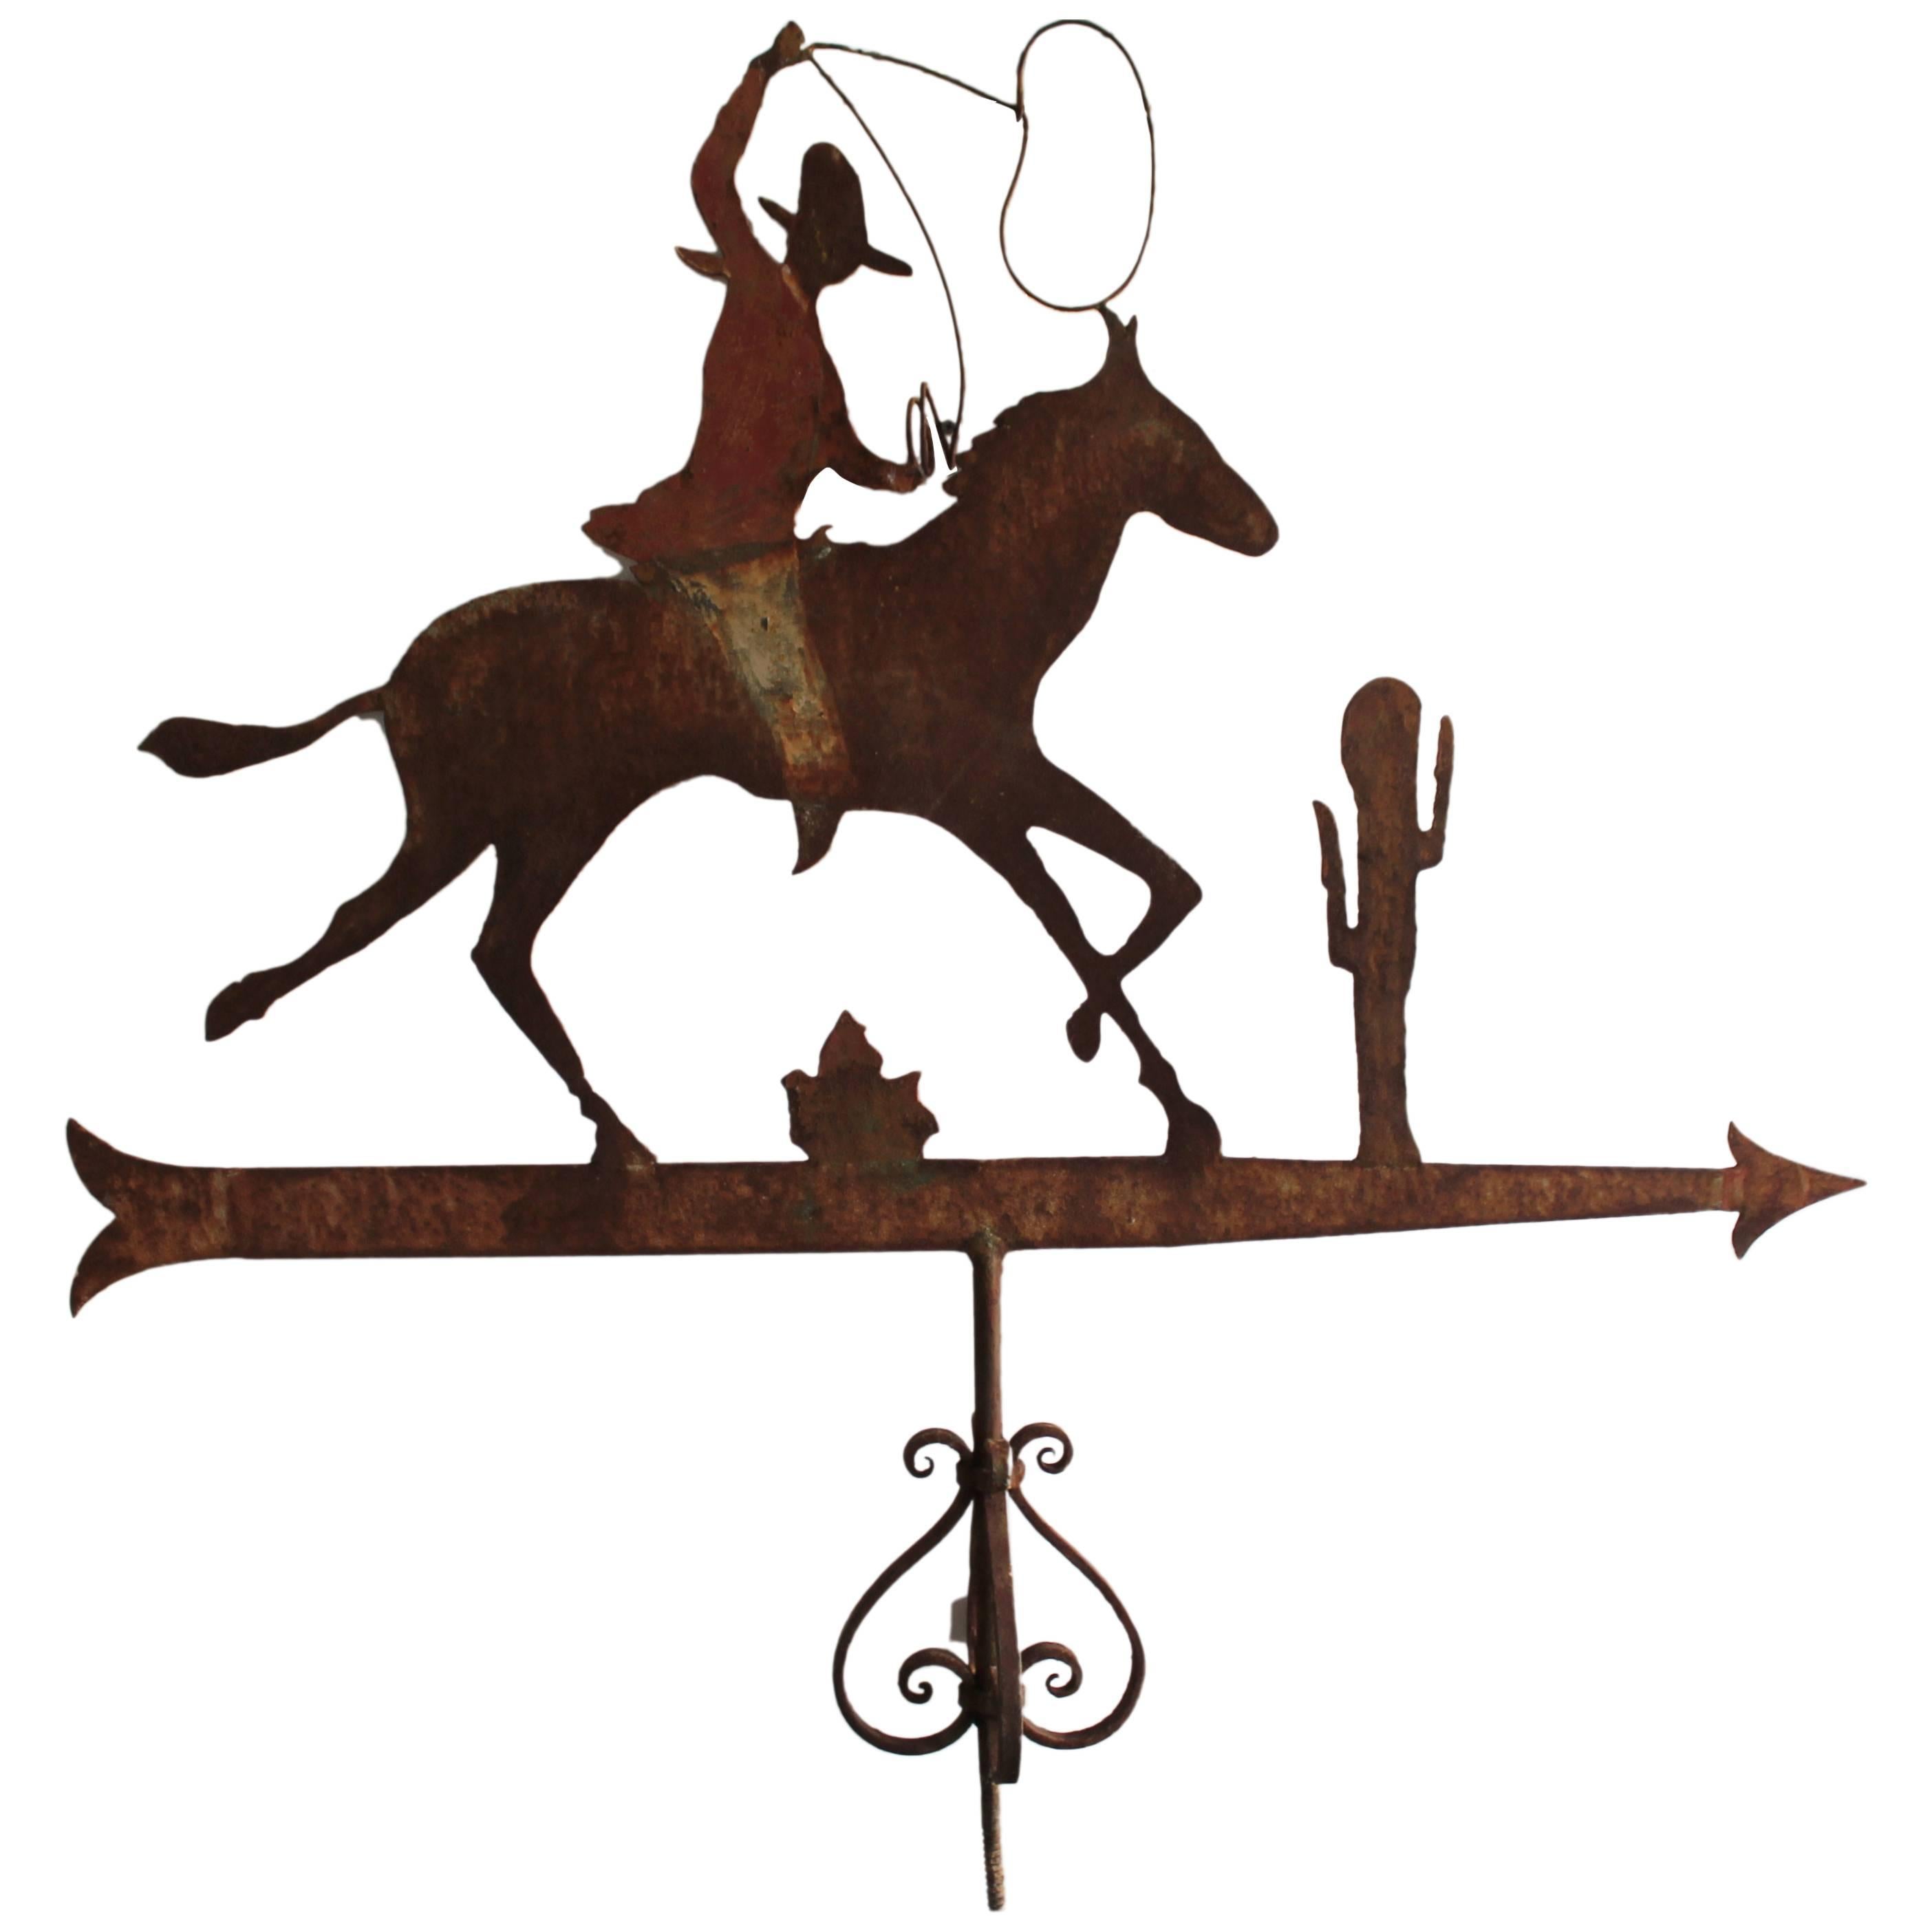 This 19th century all original painted cowboy weather vane was found on a horse ranch in northern California. The condition is as found and undisturbed original surface. The painted surface or patina is consistent with age and use. This is a one of